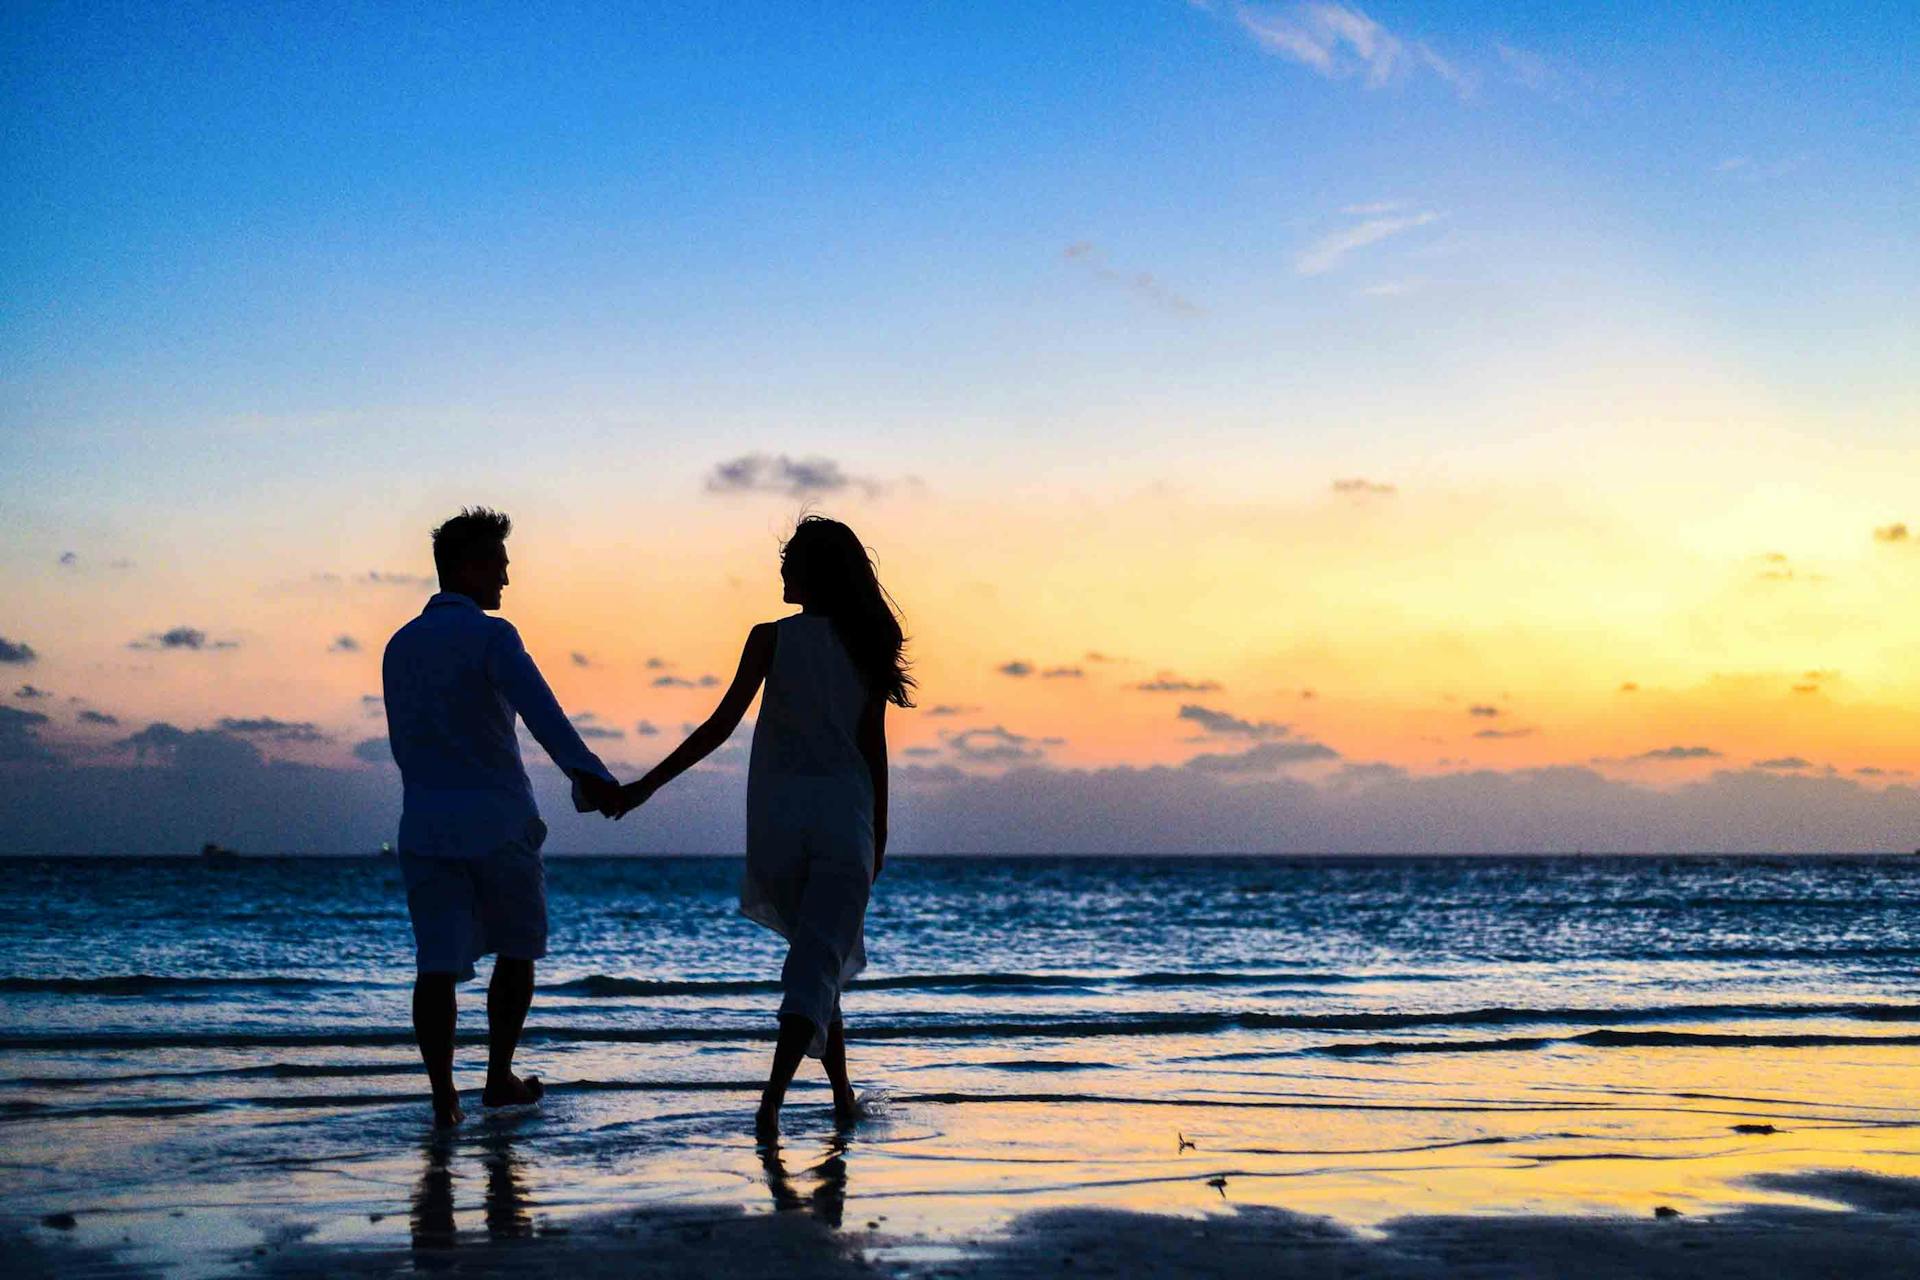 A couple holding hands while walking on a seashore during sunrise | Source: Pexels